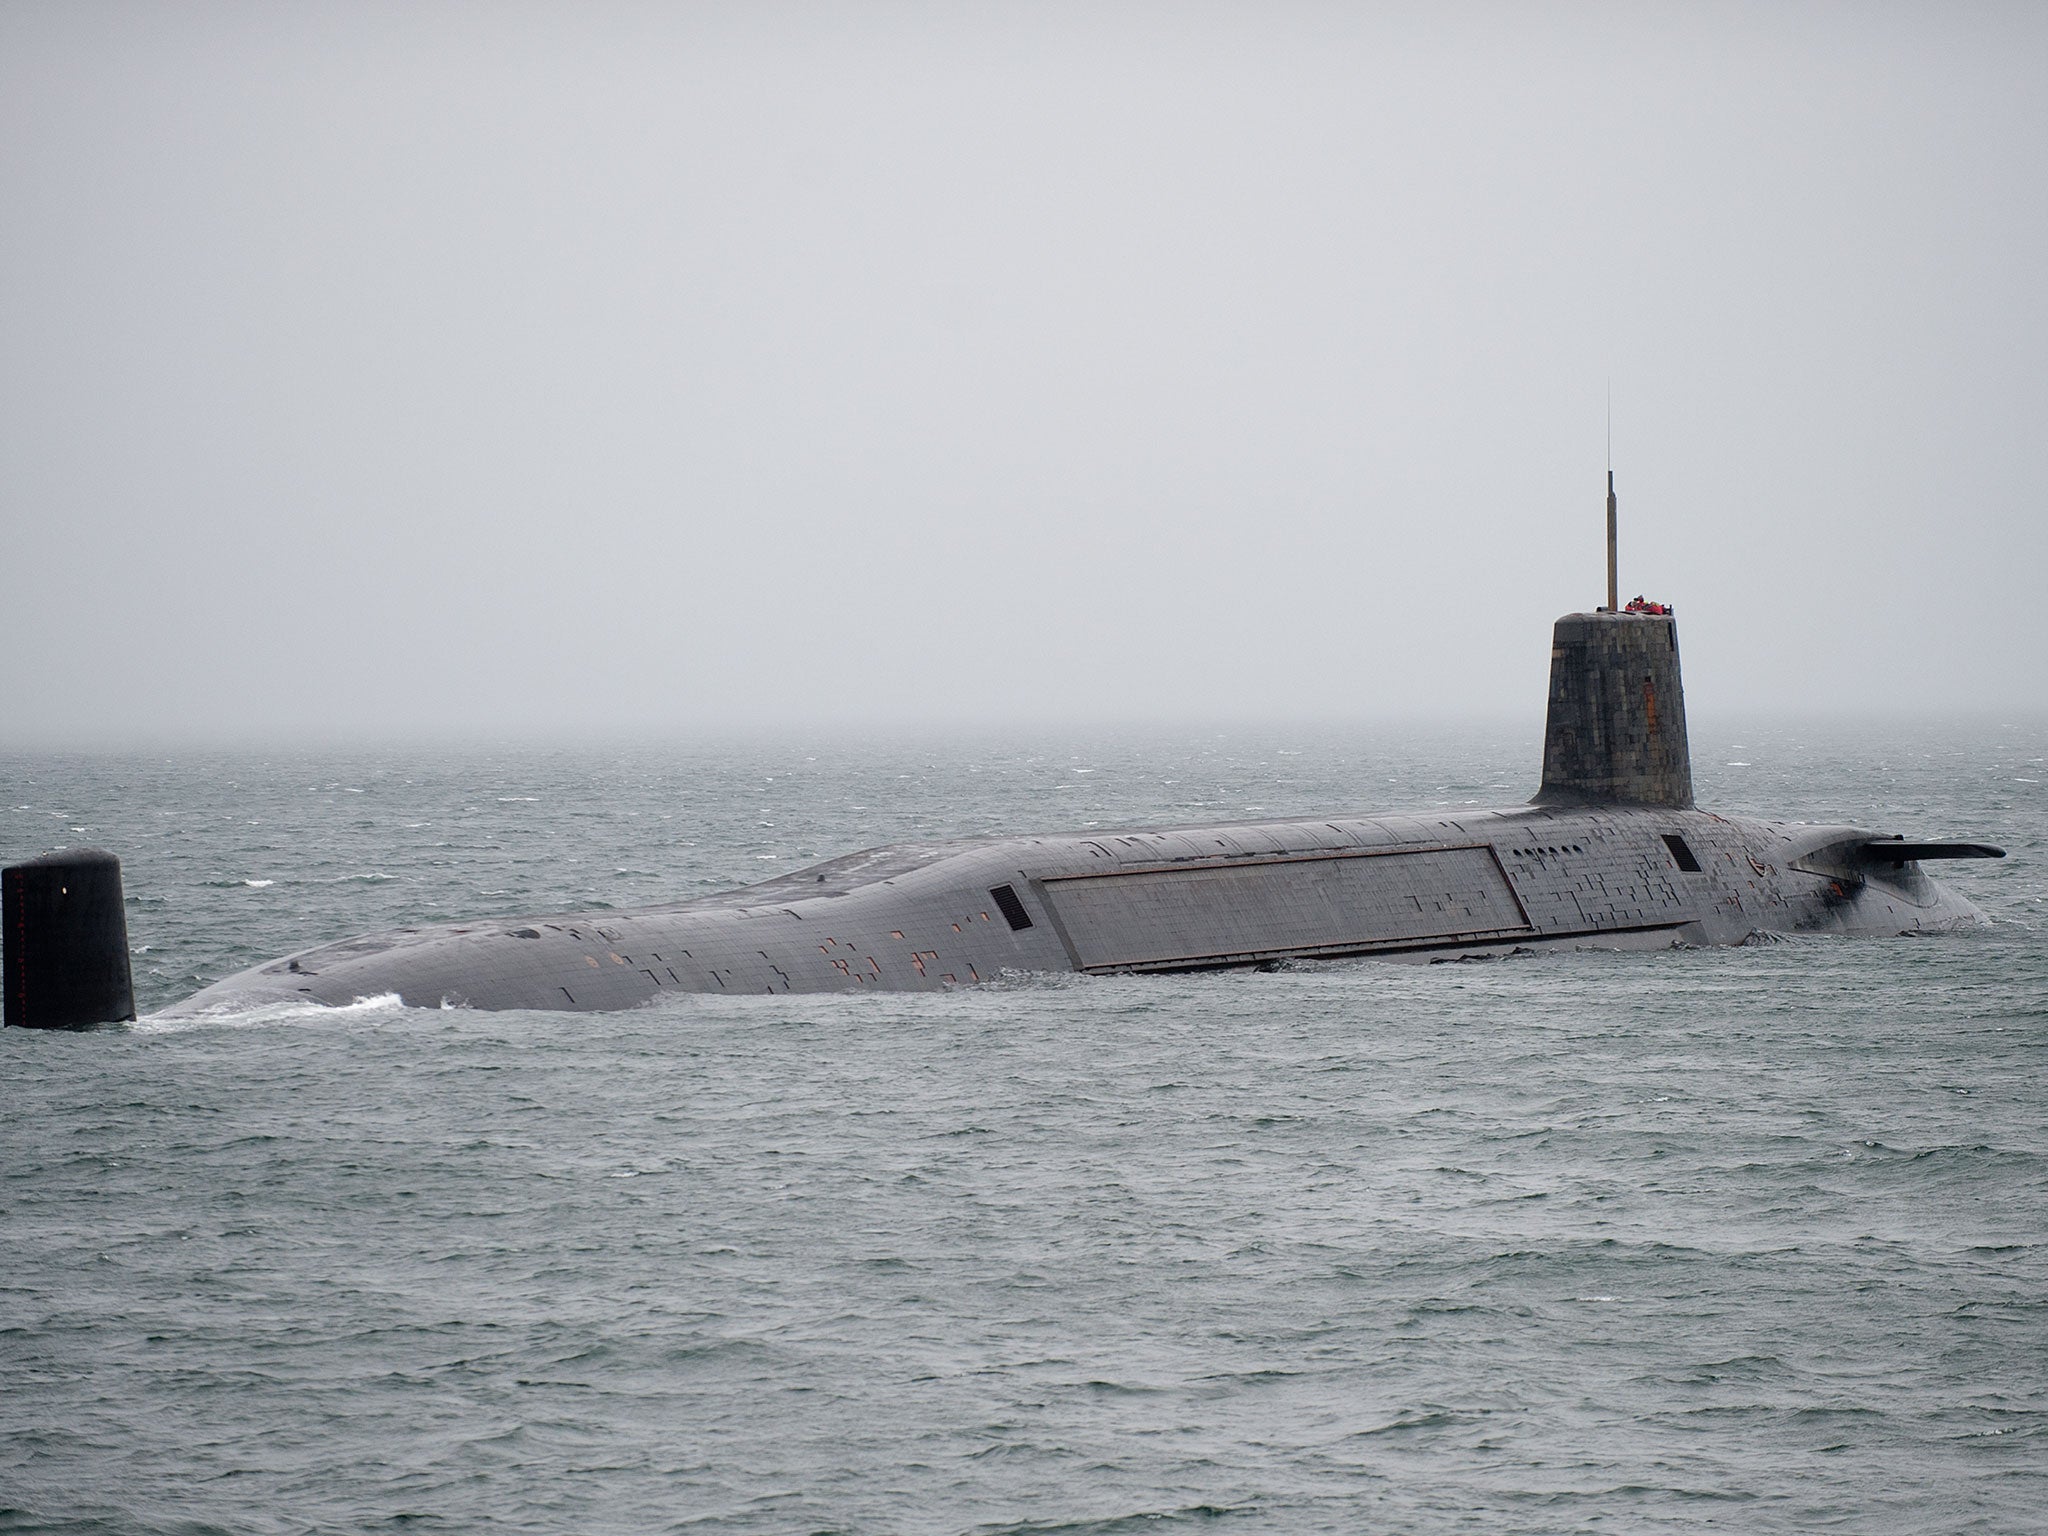 Trident nuclear submarine maintenance bases at Devonport and Faslane wiil be managed by Babcock in a£2.6bn deal